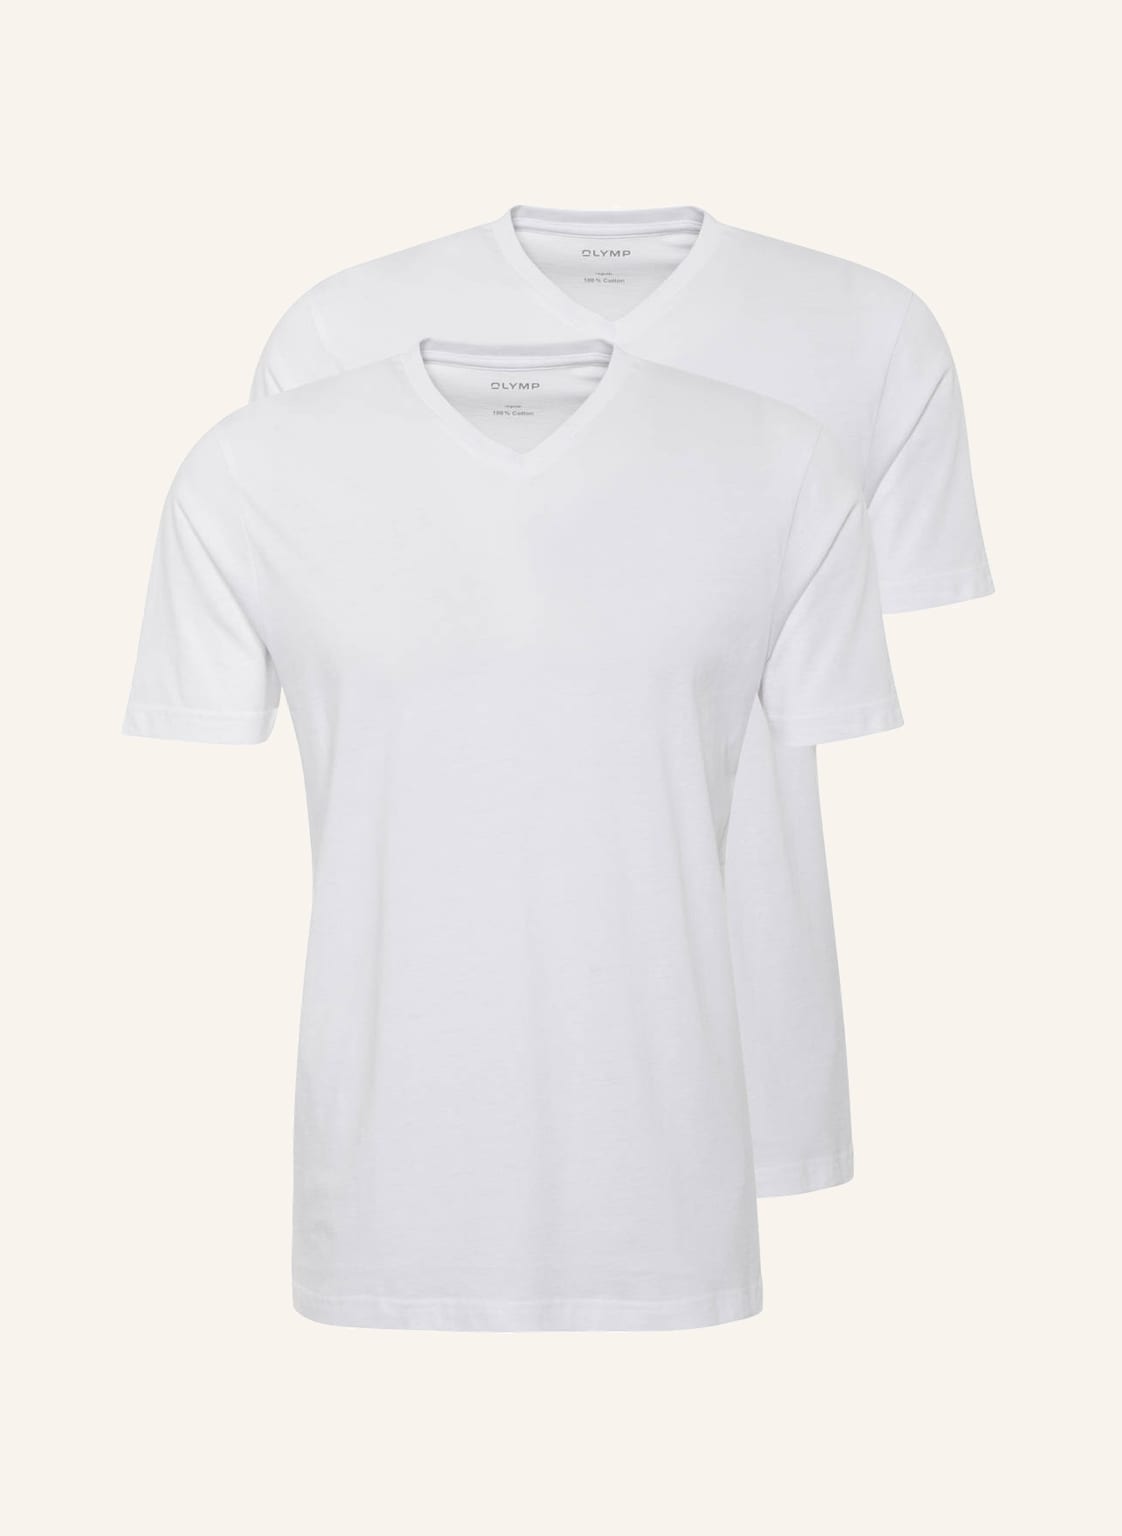 Image of Olymp 2er-Pack T-Shirts weiss